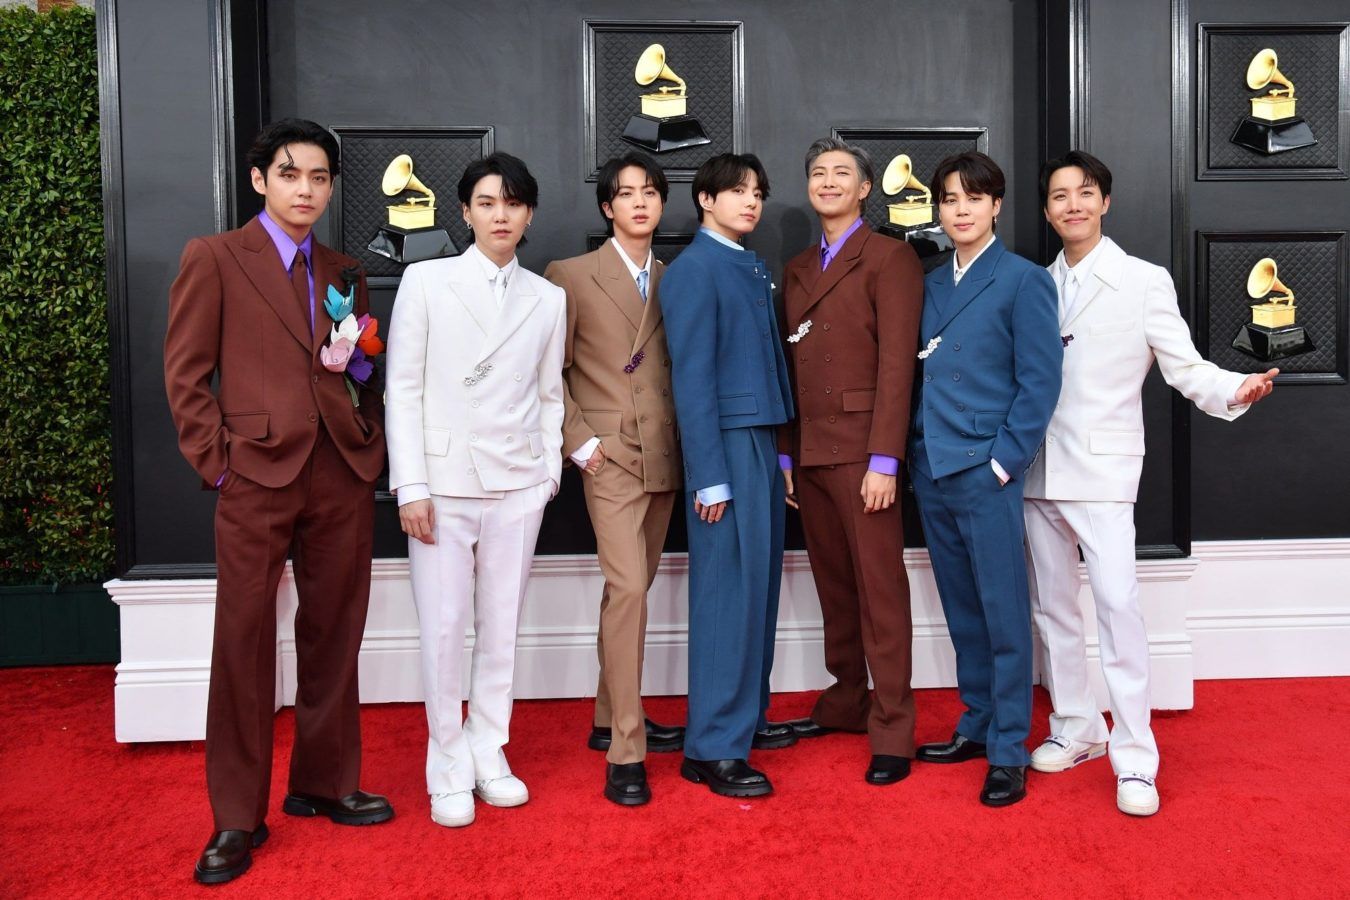 Grammys 2022: The best-dressed men and women on the red carpet